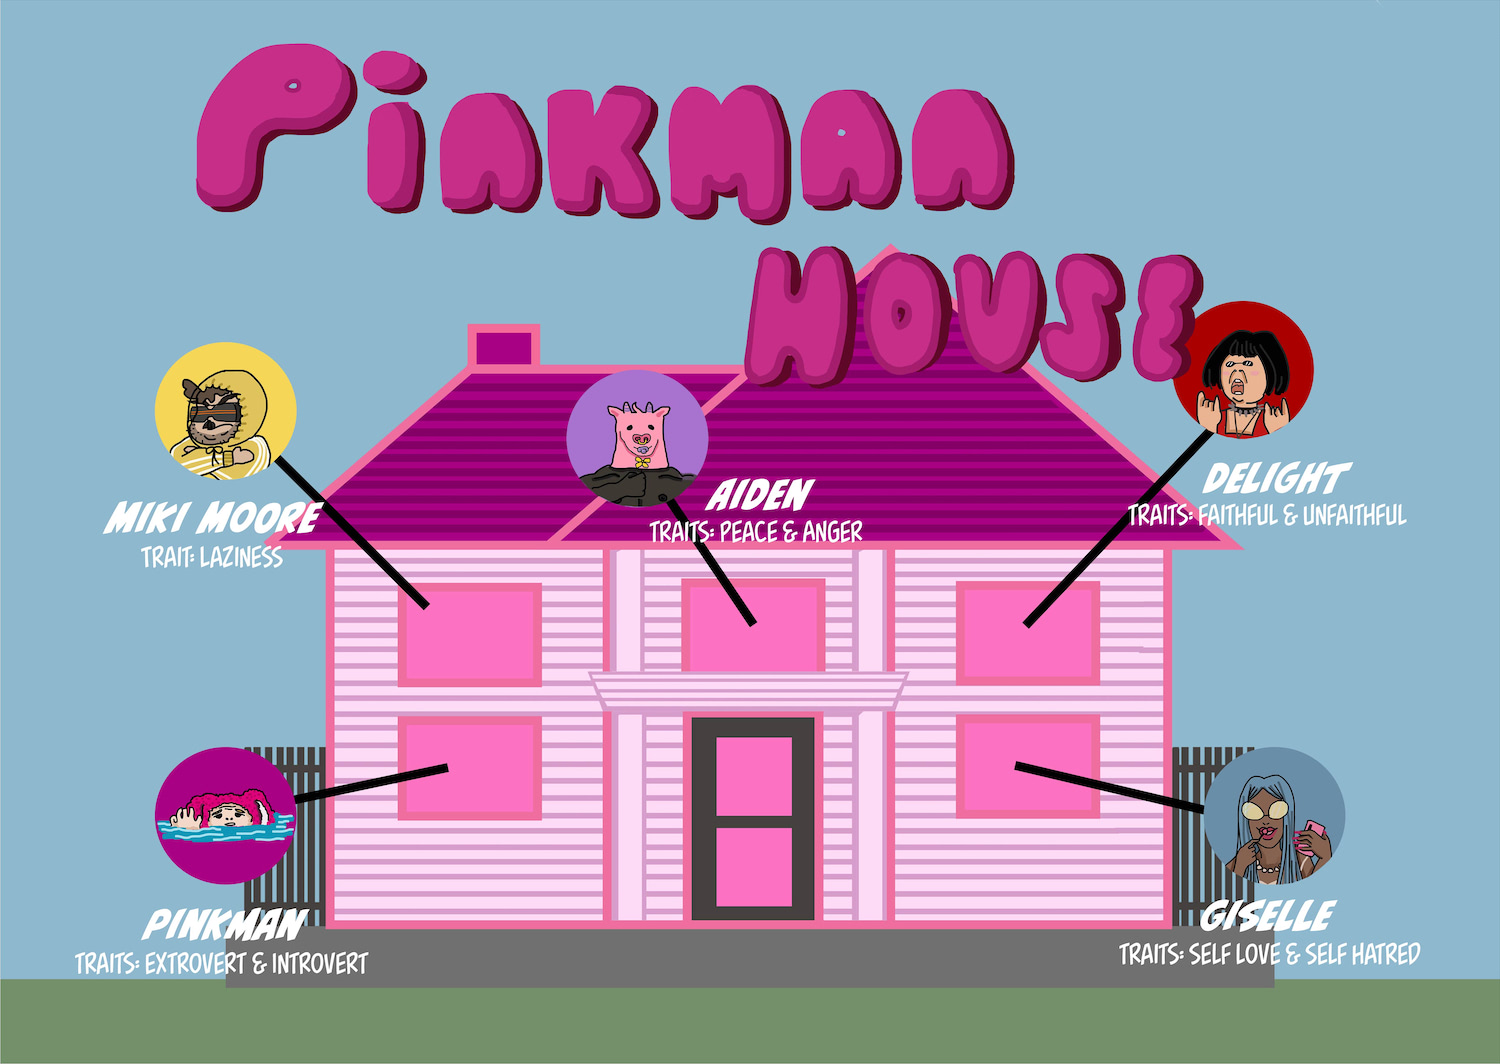 The world view of the story Pinkman evolves around the Pinkman house. It is a story about the main character Pinkman and his roommates Giselle, Aiden, Miki Moore, and Delight. The aim of the house was to symbolize my body and the diverse characters dwelling inside the house were to represent my multipersonality.